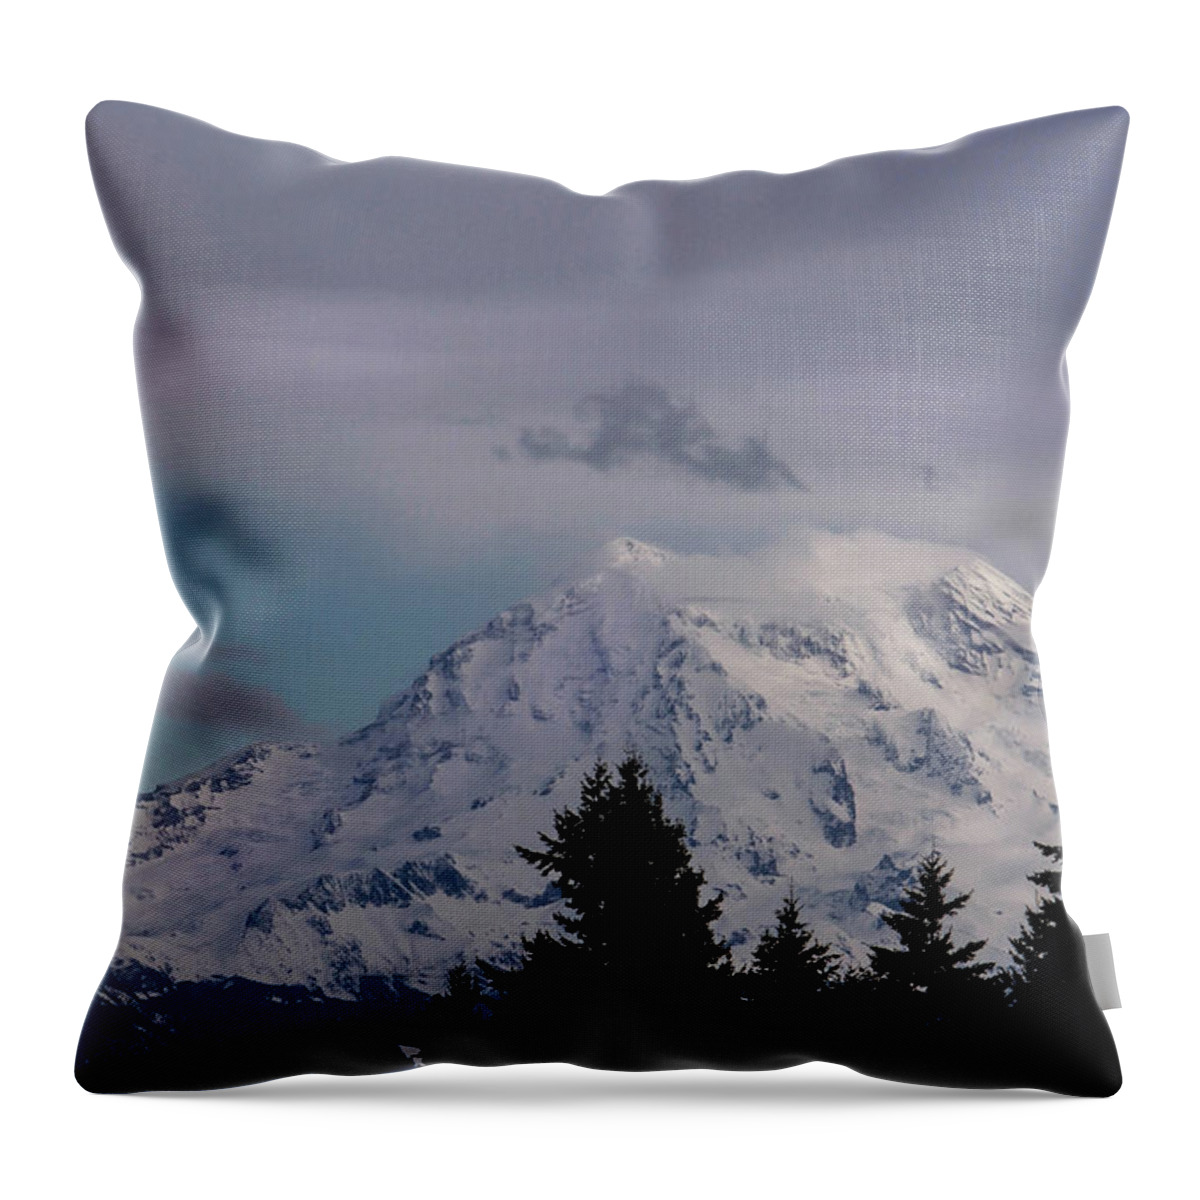 Landscape Throw Pillow featuring the photograph Mt Rainier by Cheryl Day